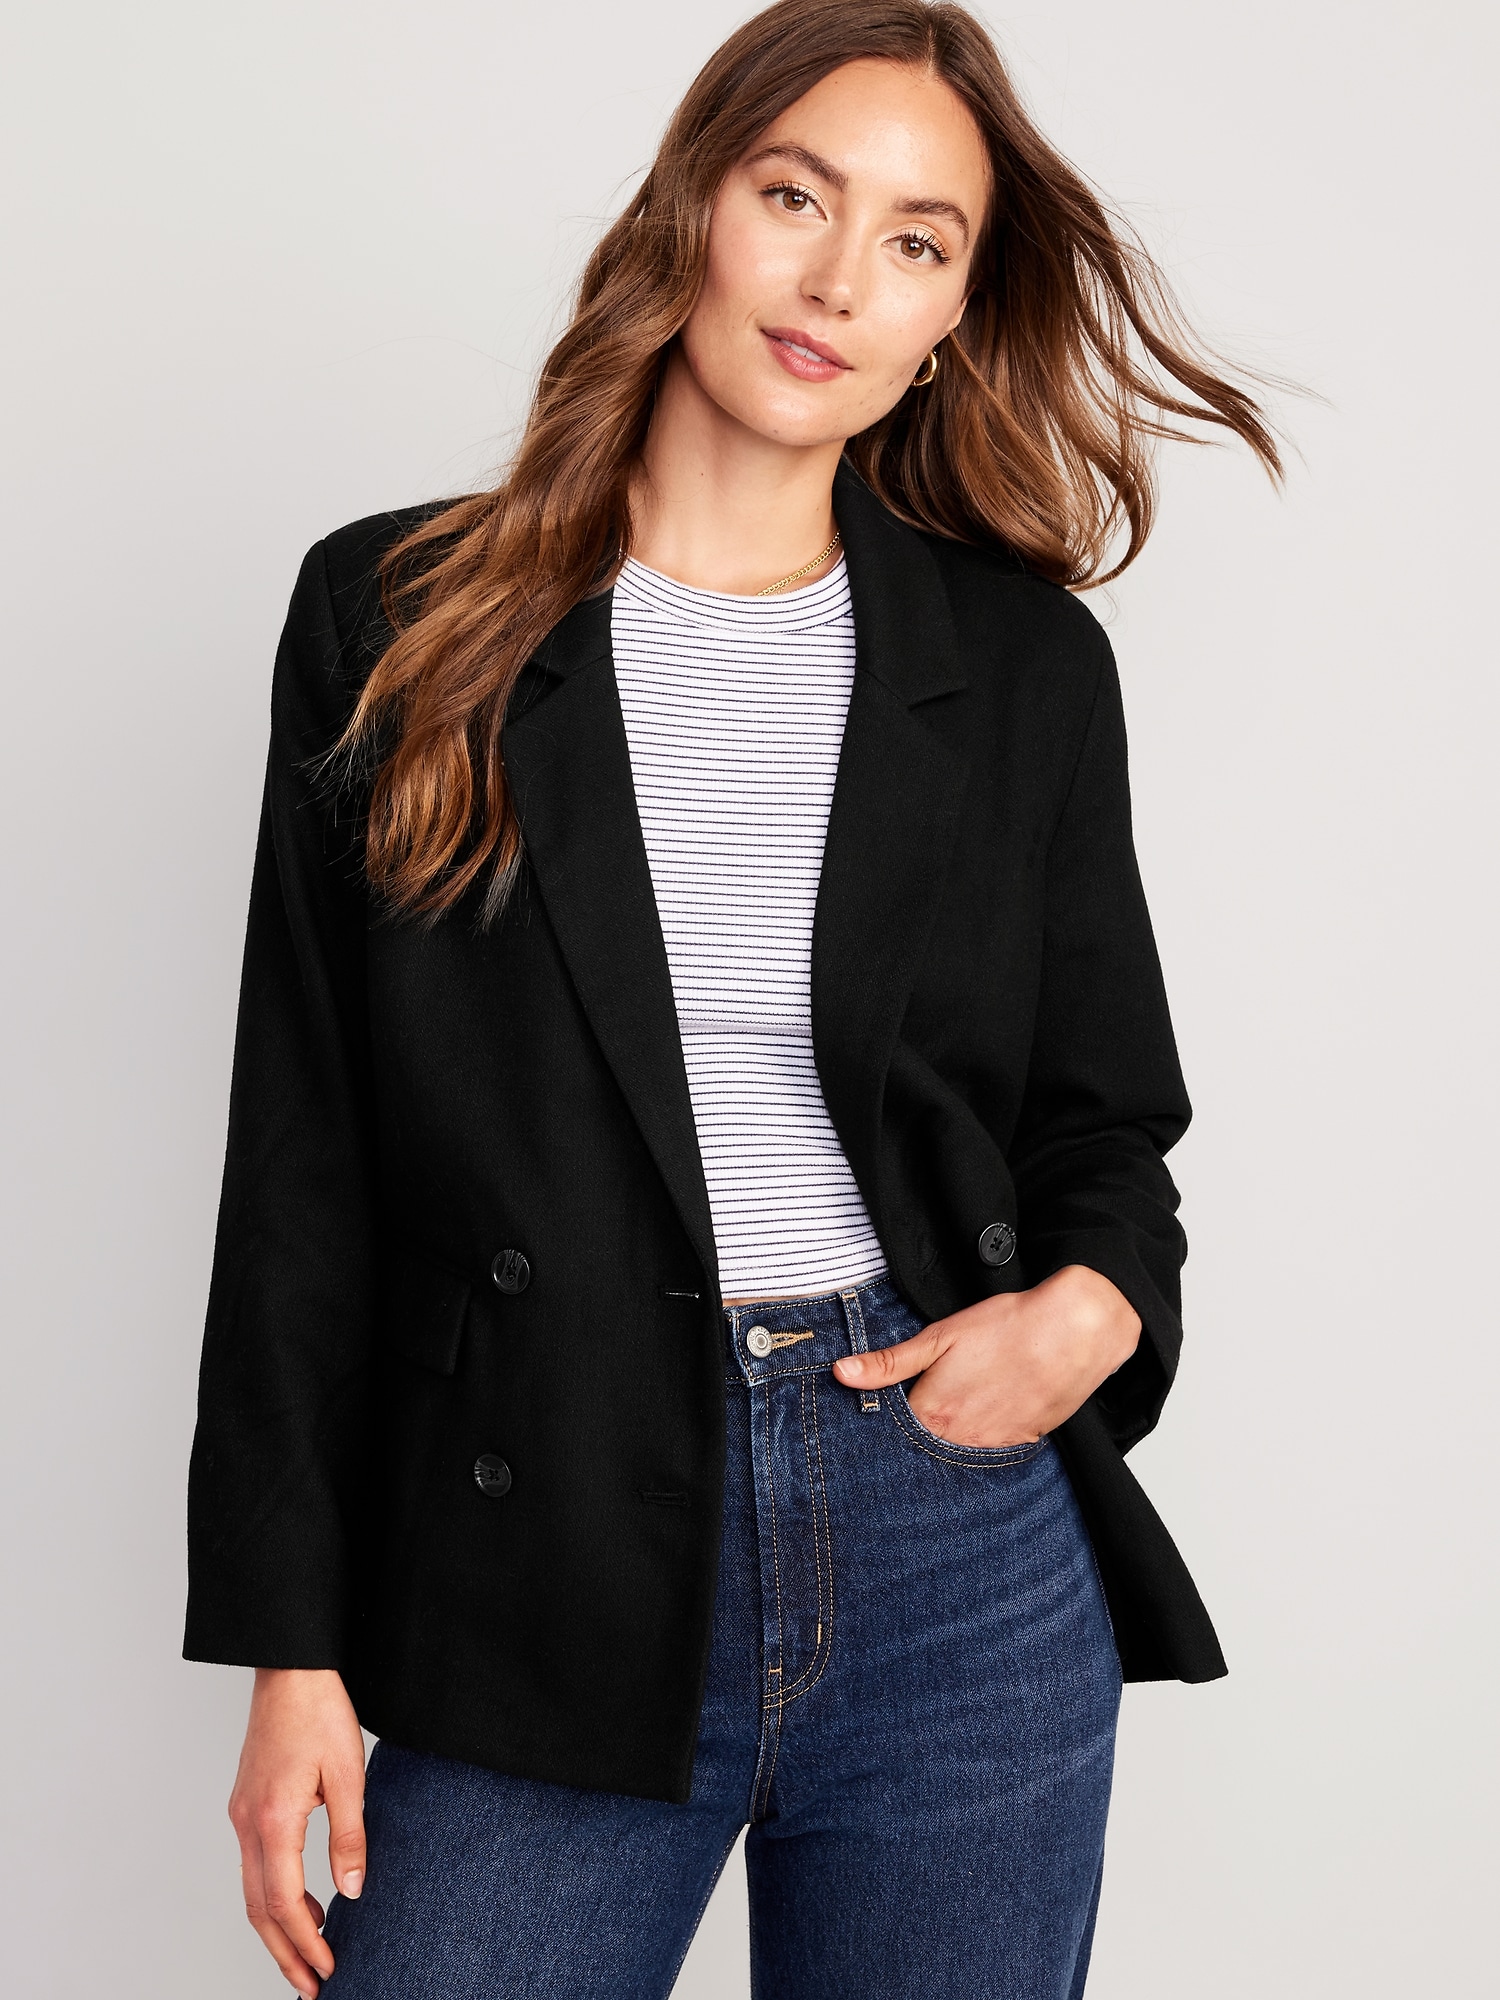 Double-Breasted Textured Blazer